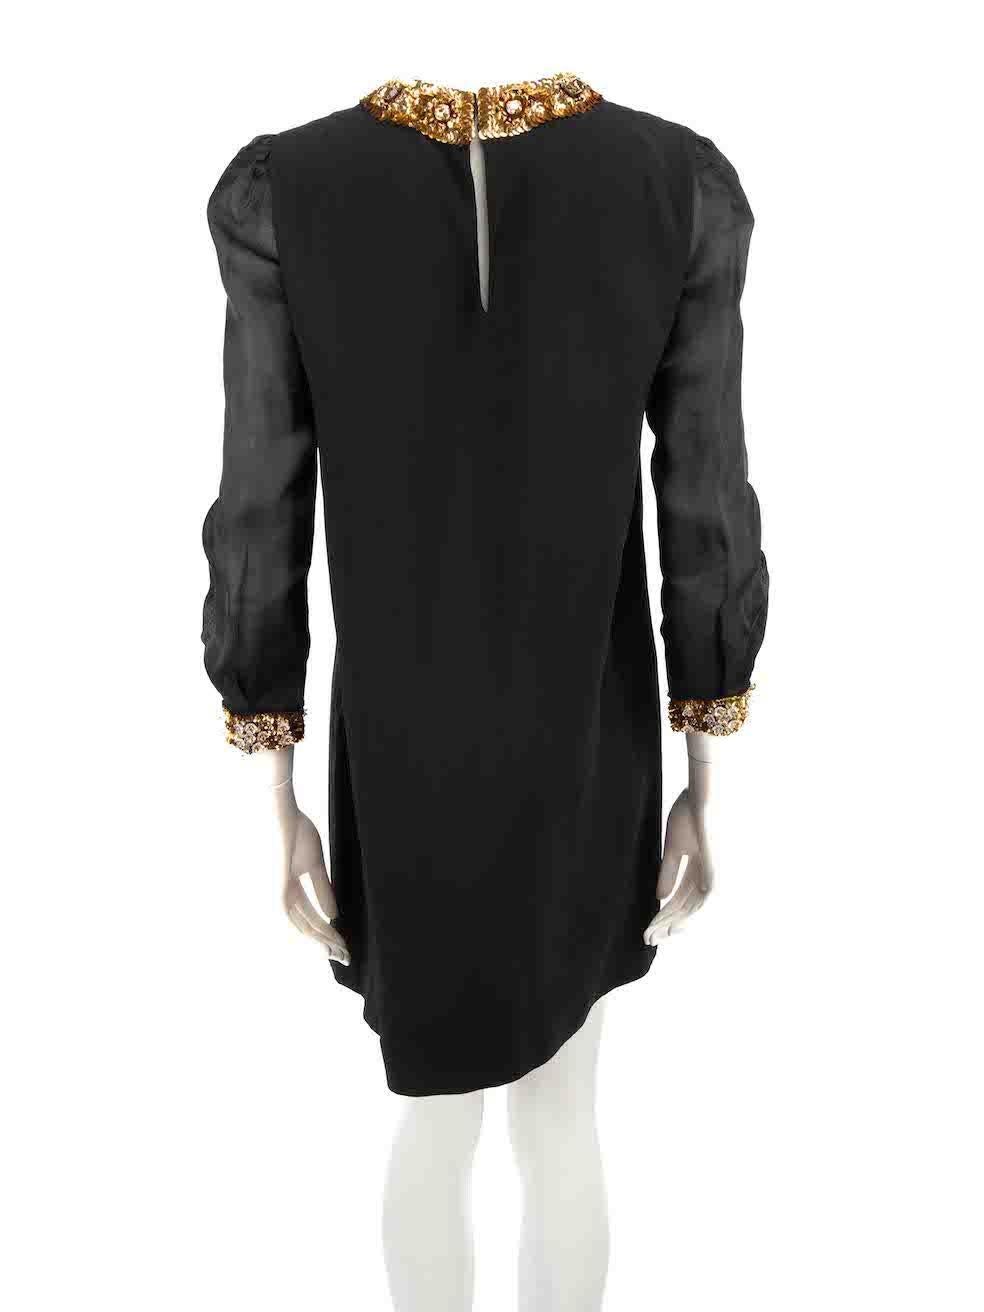 Miu Miu Black Embellished Sheer Sleeve Dress Size M In Good Condition For Sale In London, GB